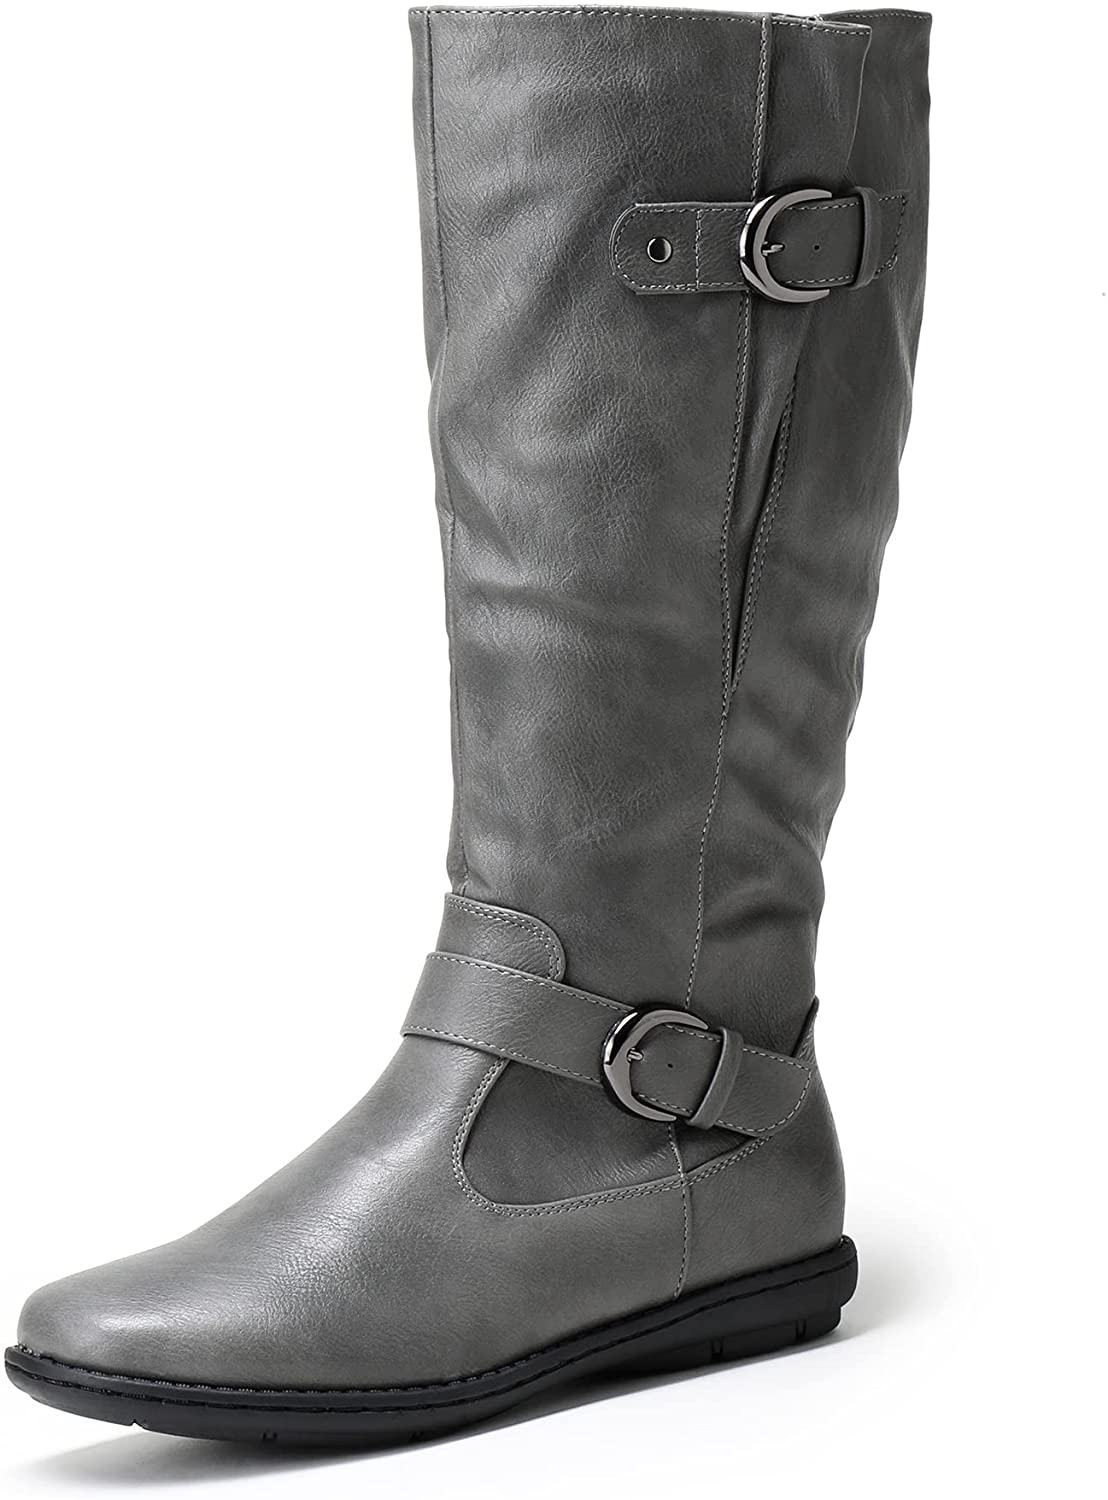 DREAM PAIRS Womens Knee High Motorcycle Riding Winter Boots 